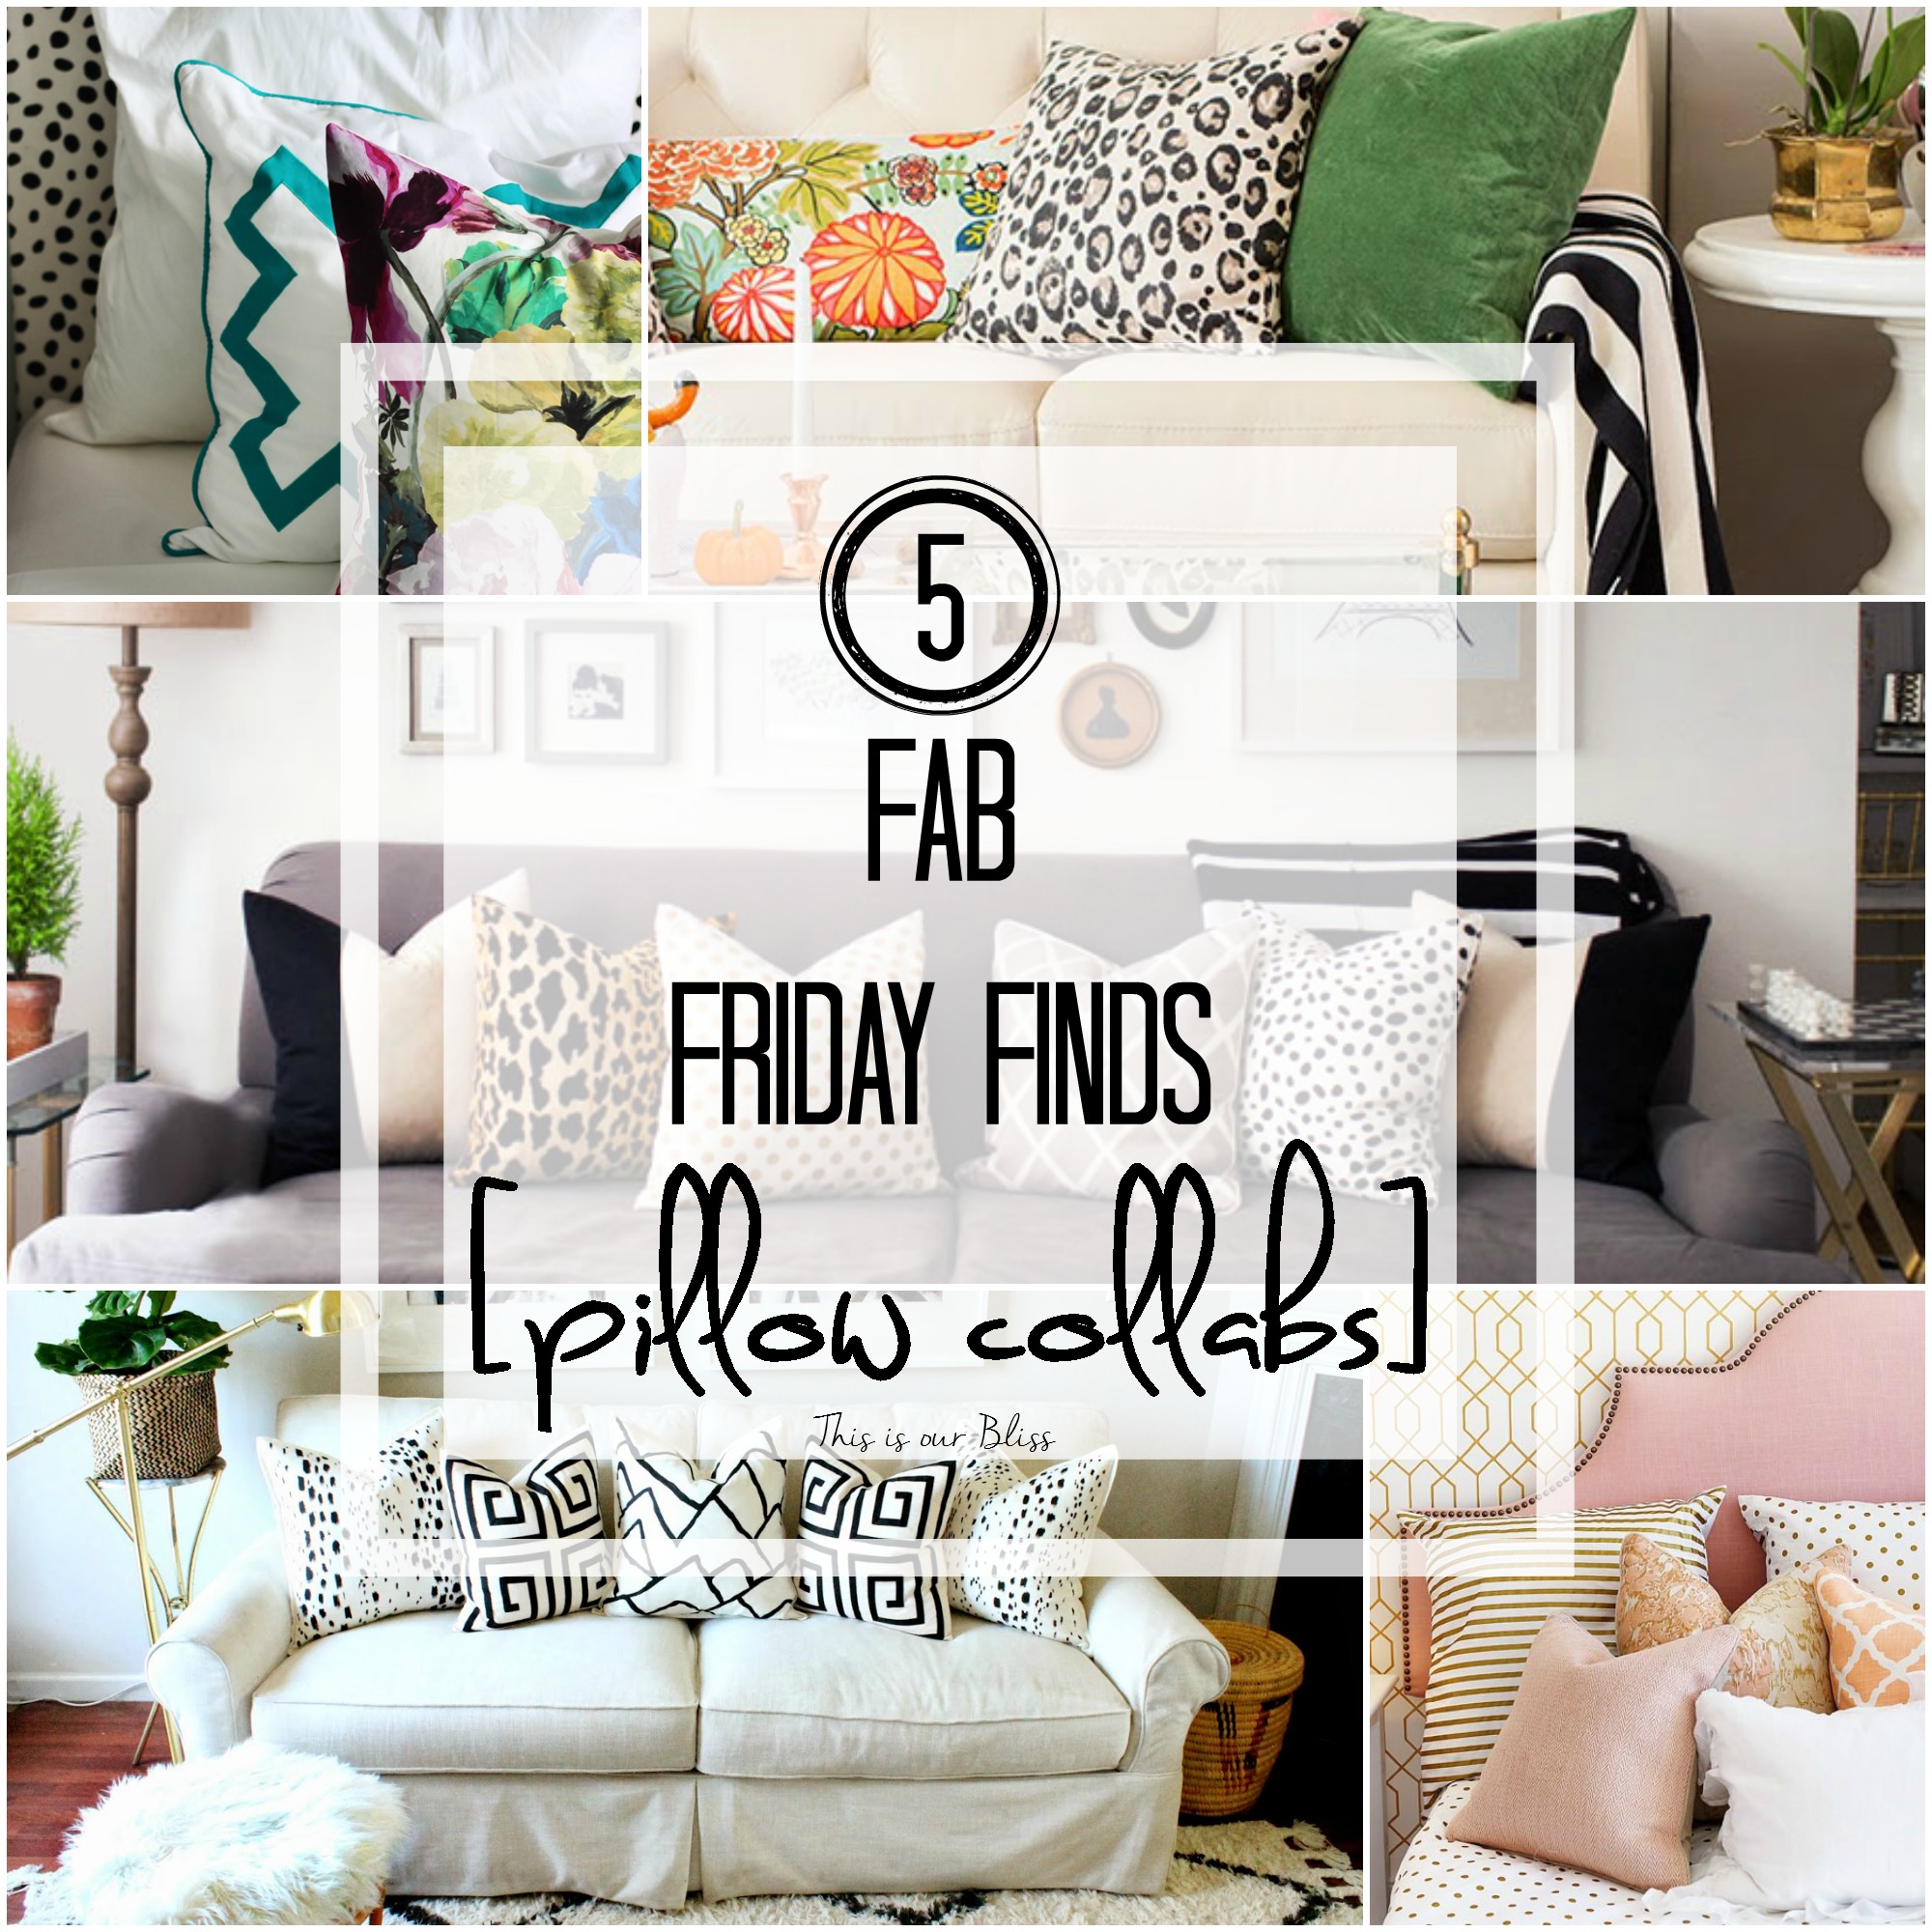 5 fab friday finds - pillow collabs - pillow combos - pillow styling - This is our Bliss 1